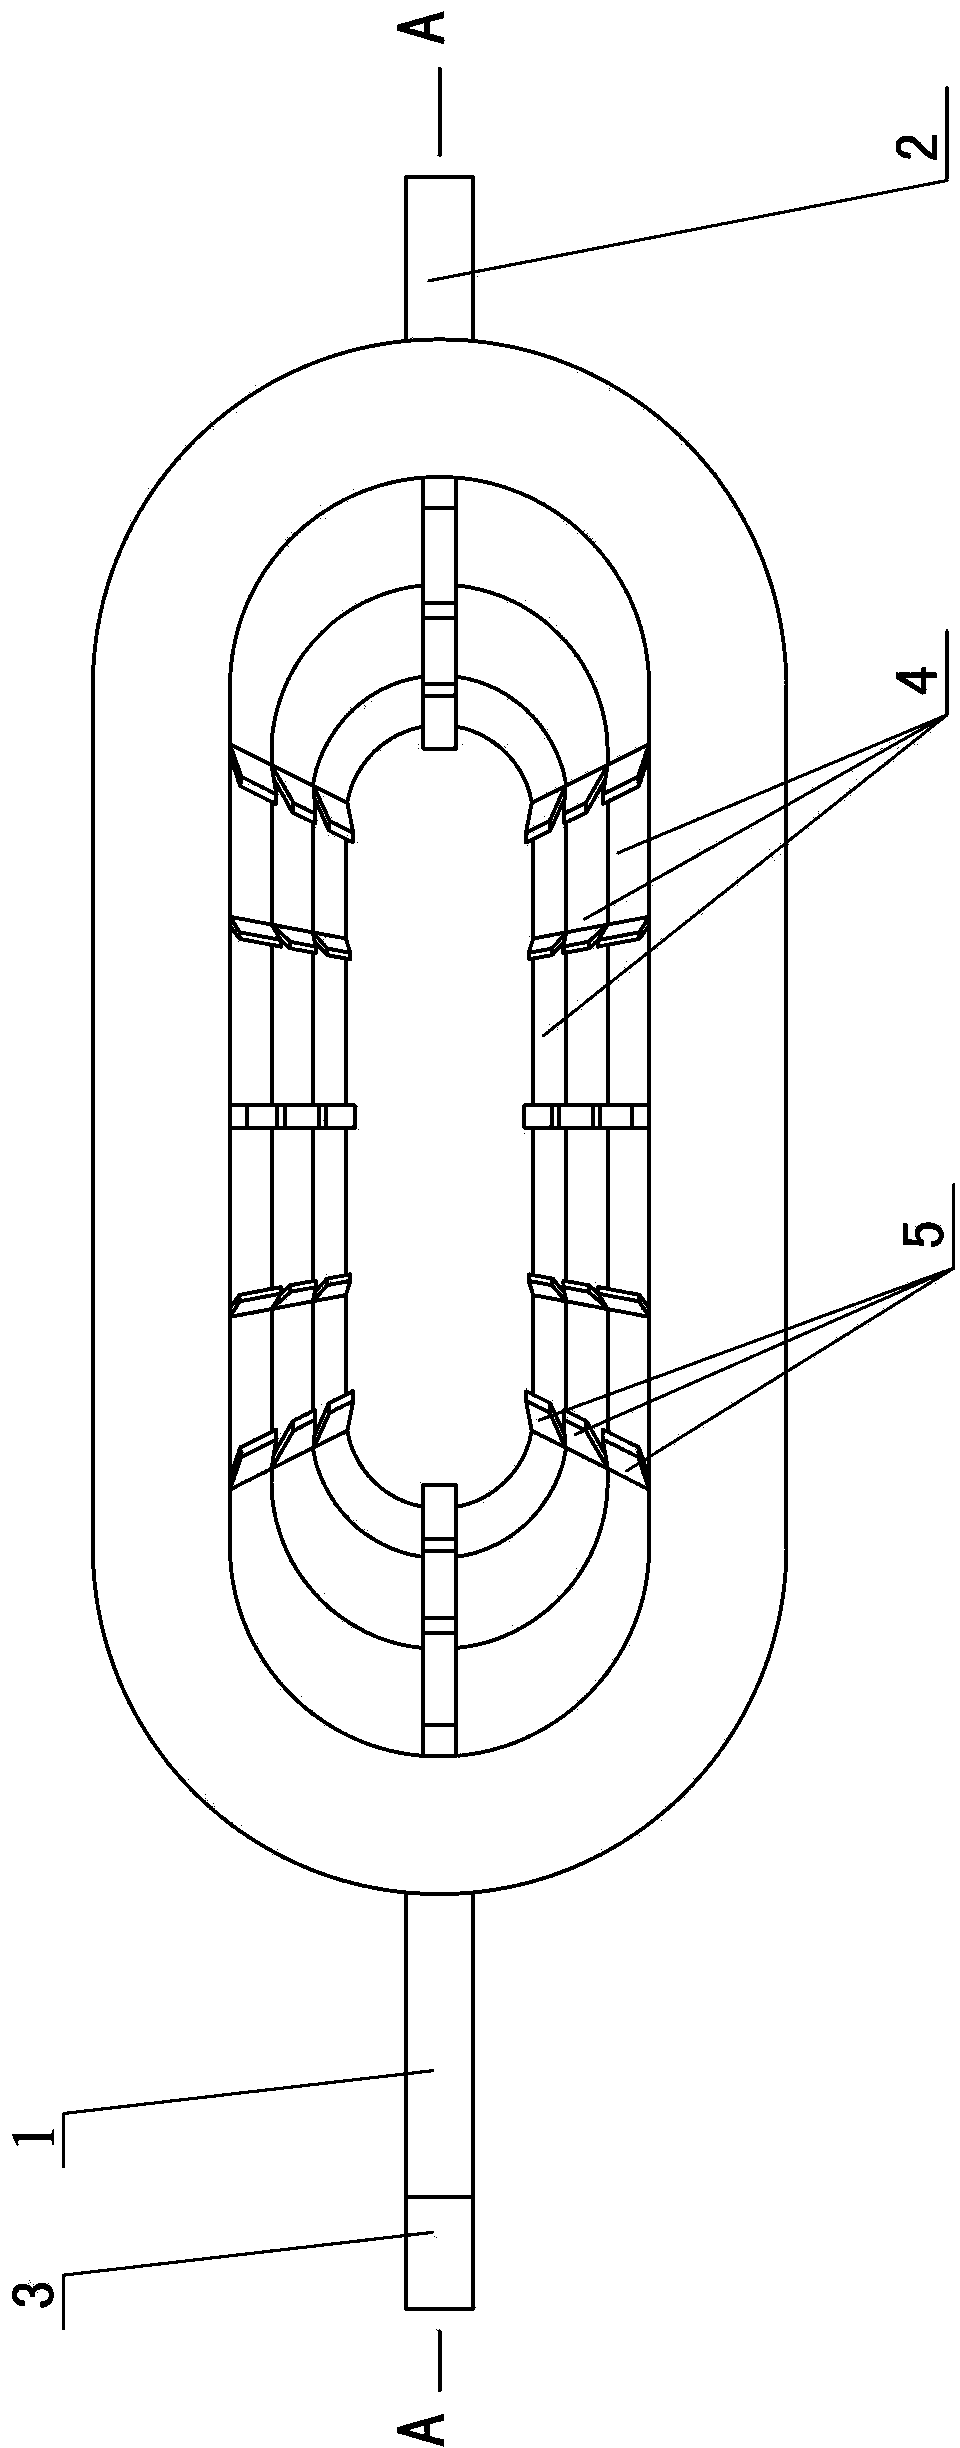 Pot-type calcinator multi-level series fin type cooling device for coke after high-temperature calcination